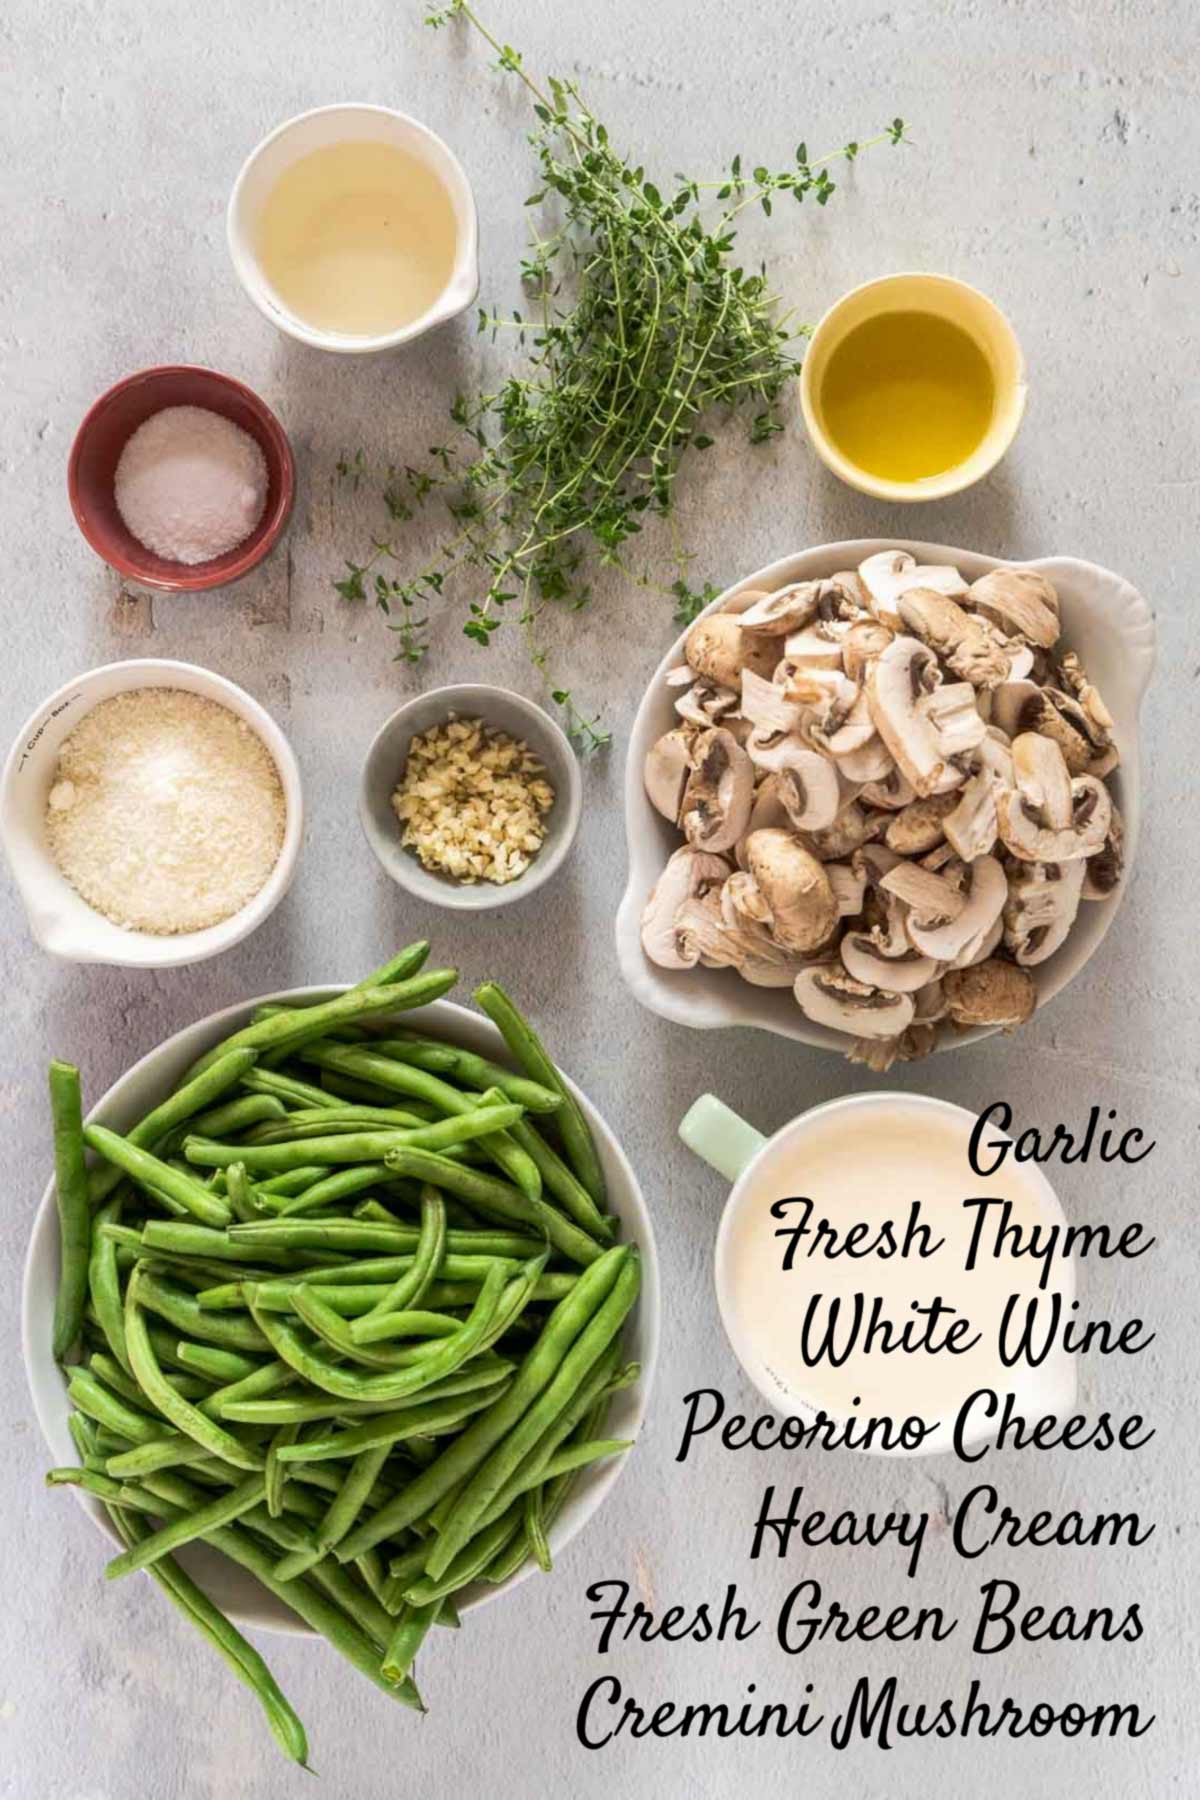 ingredients for green bean casserole without canned mushroom soup